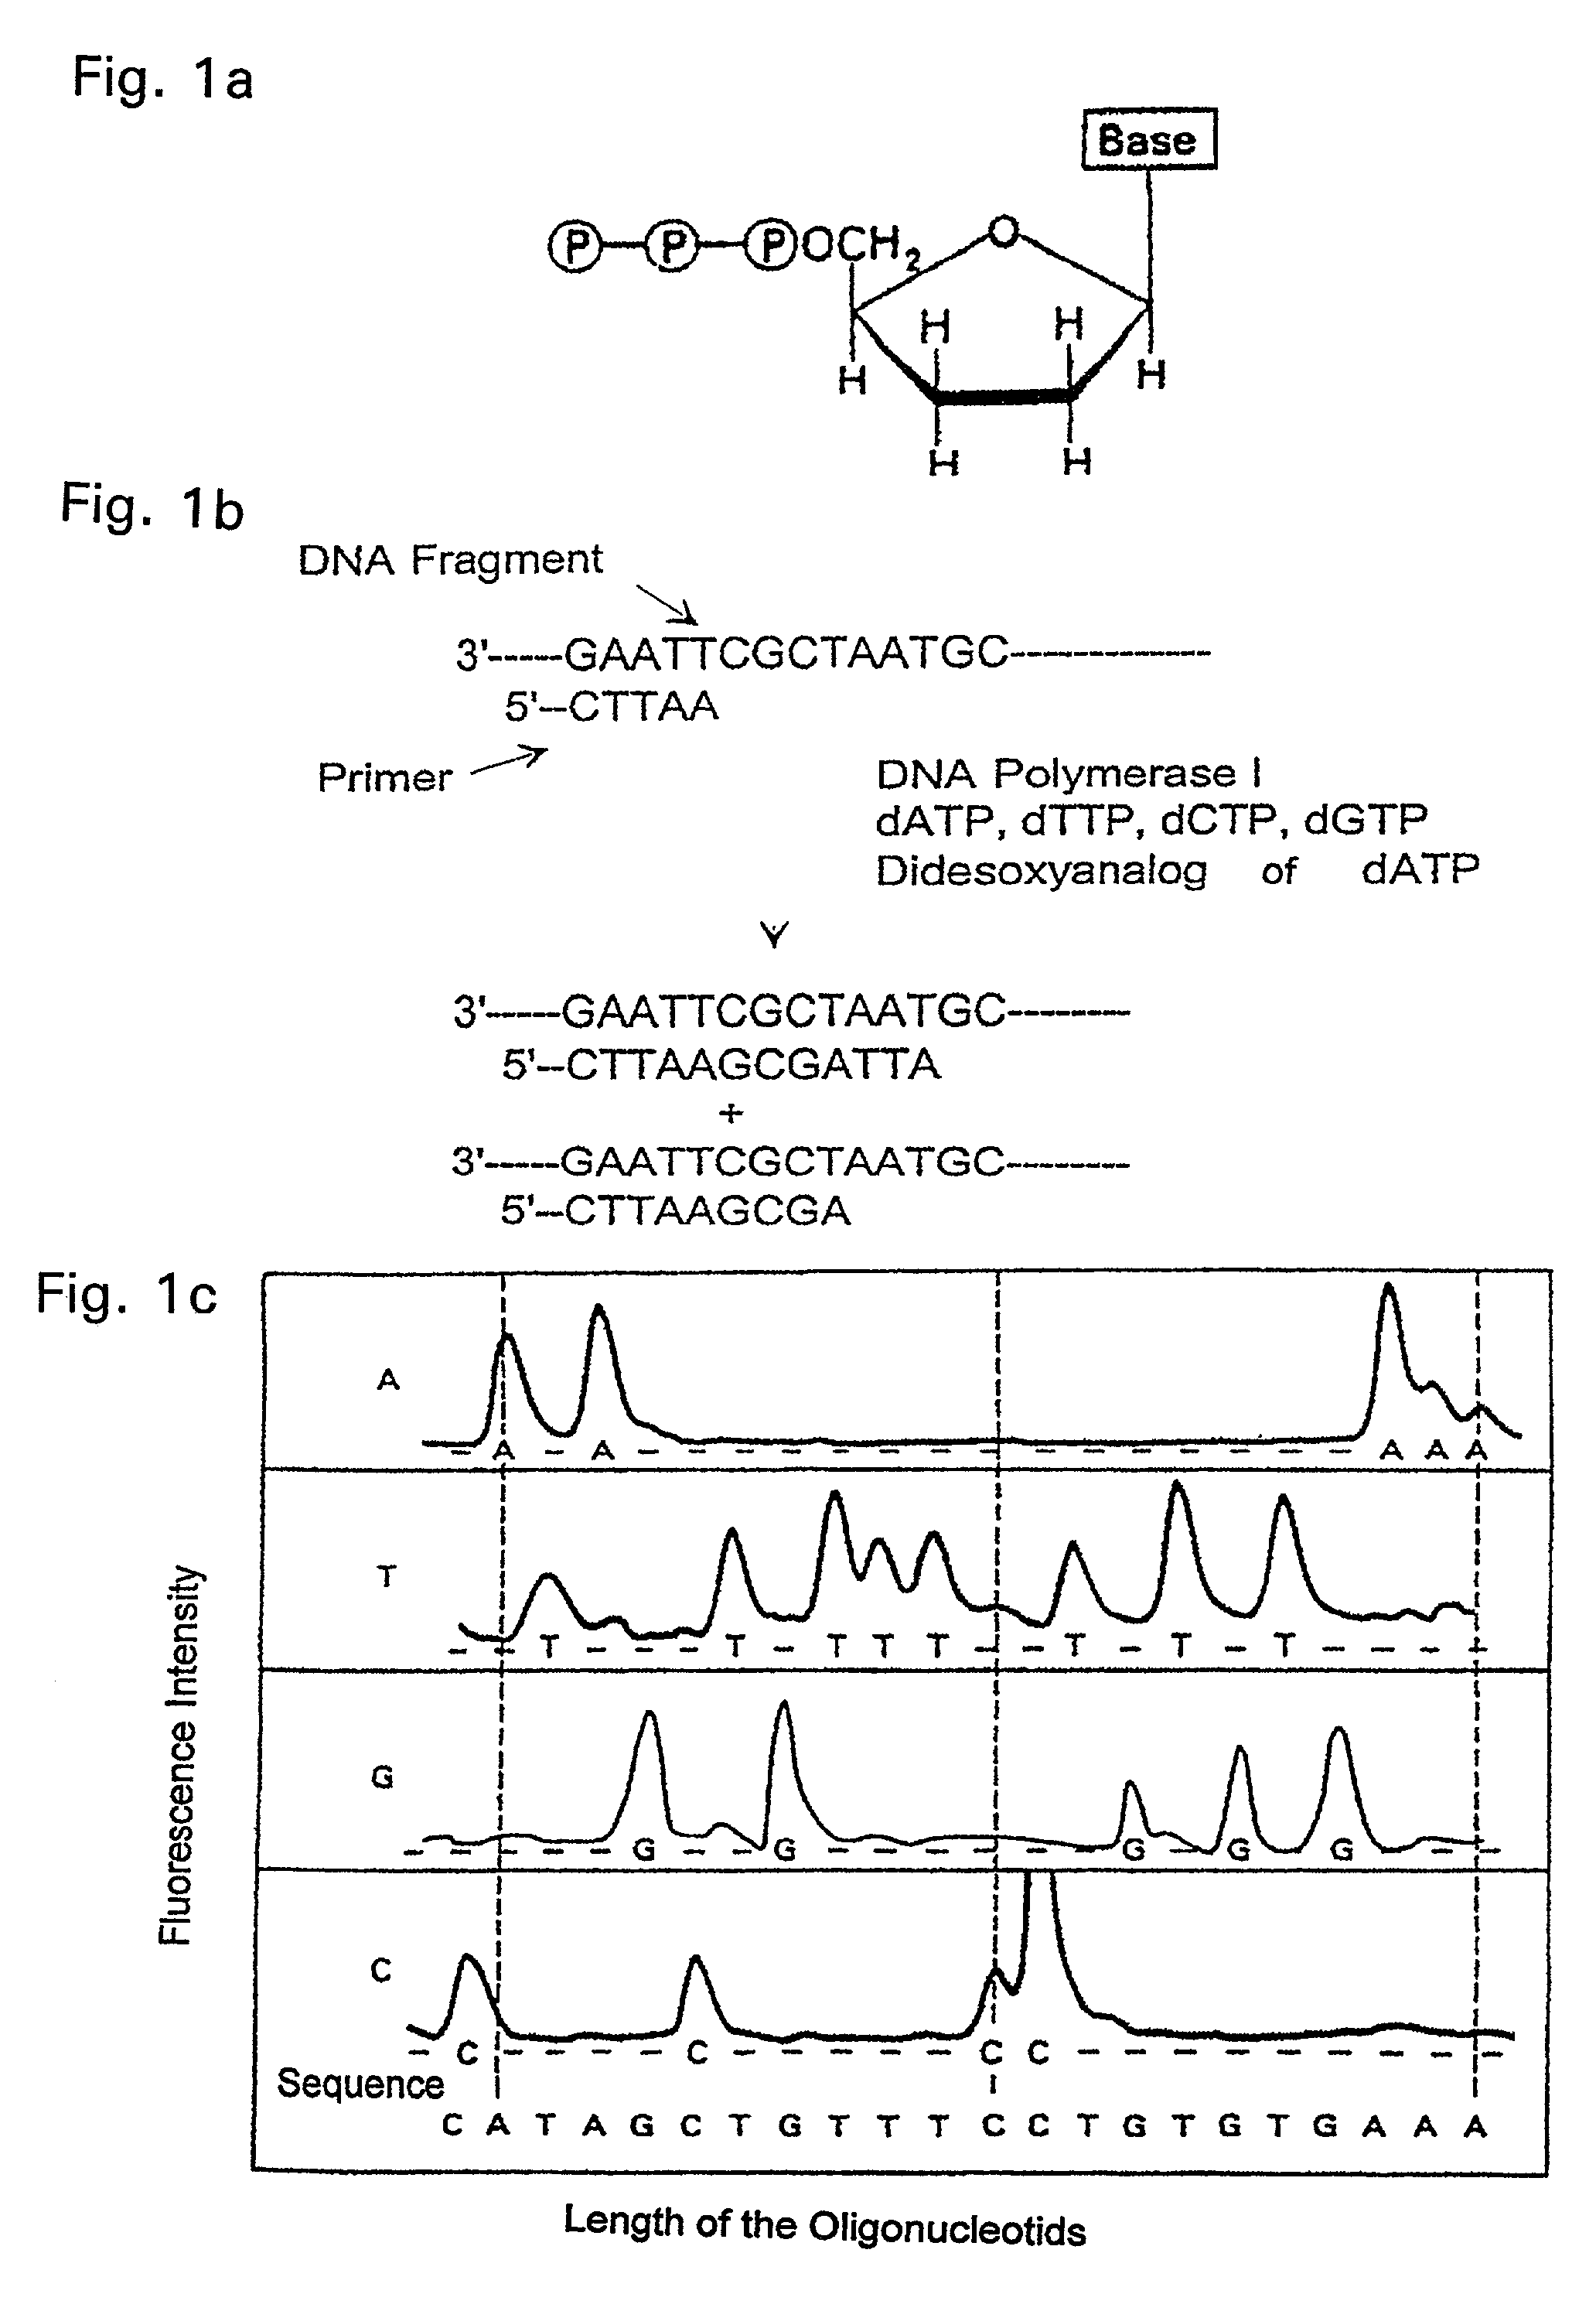 Method of the electrochemical detection of nucleic acid oligomer hybrids